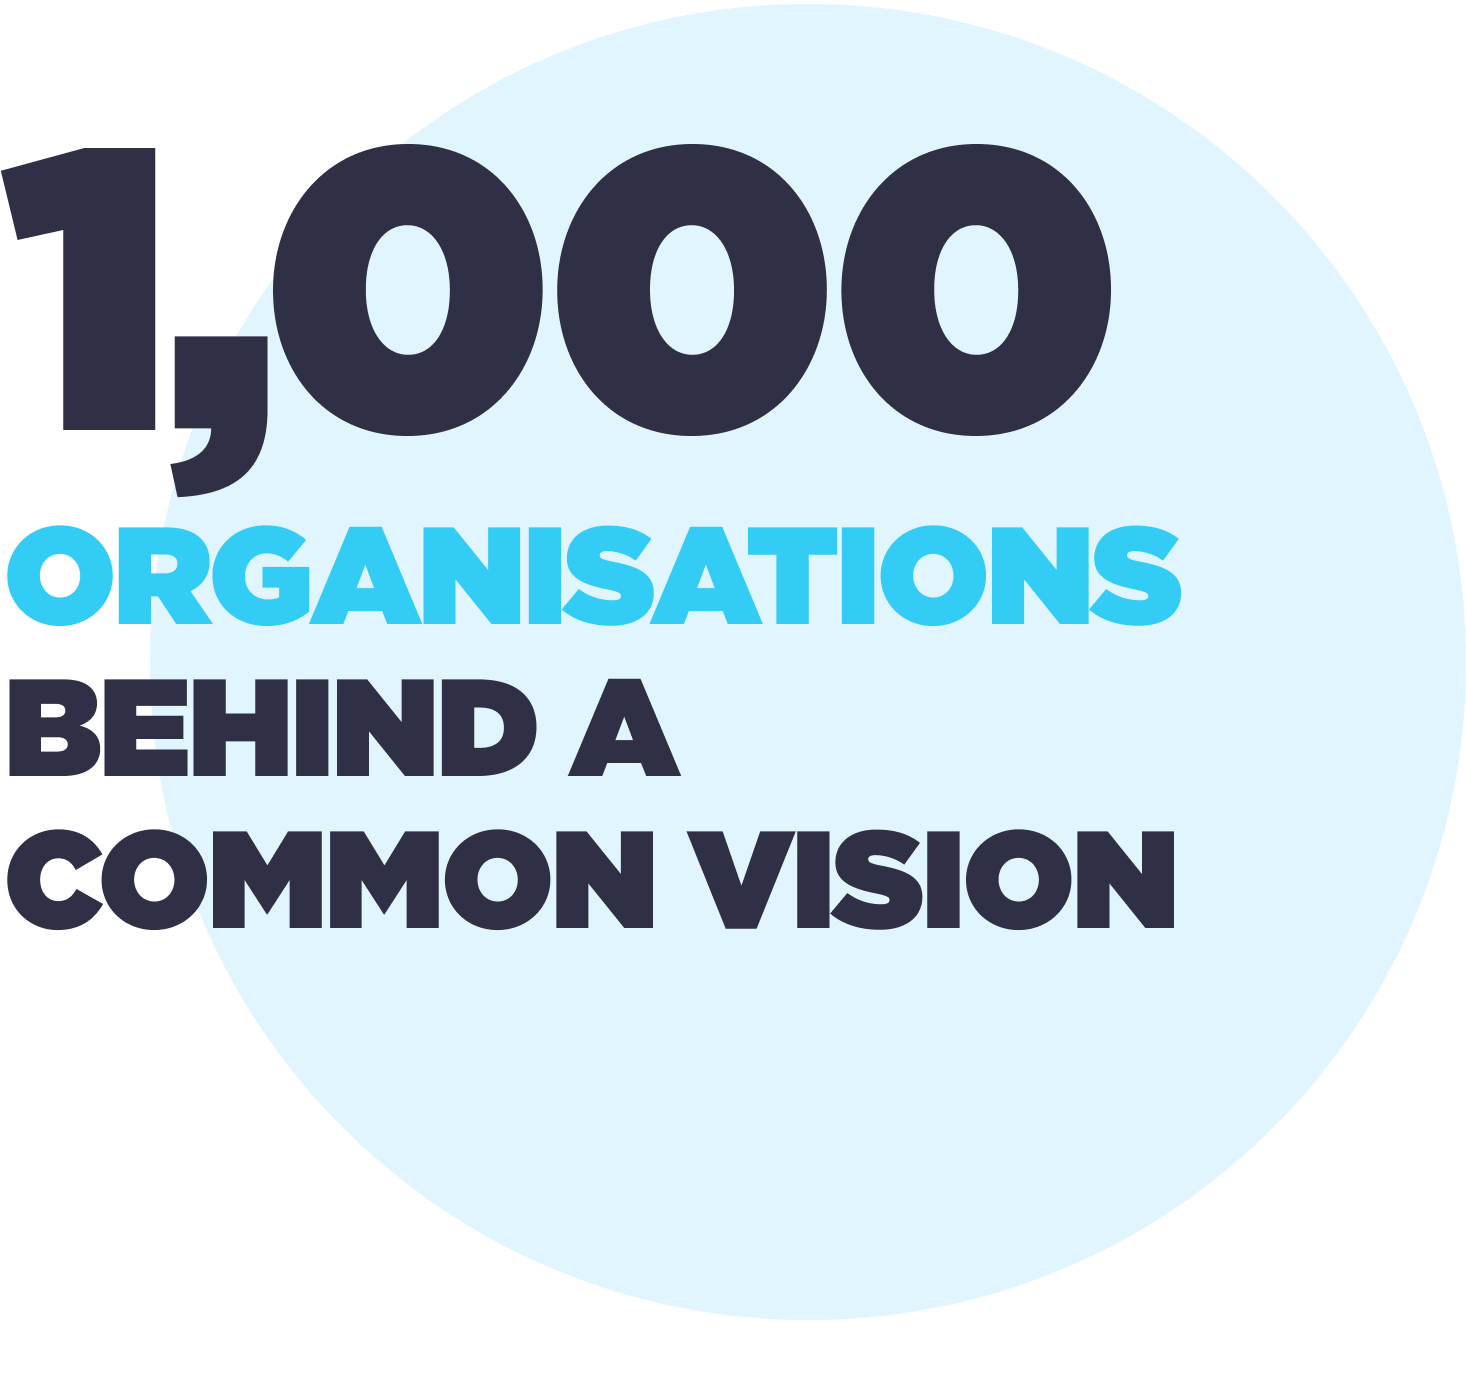 1000 organisations behind a common vision